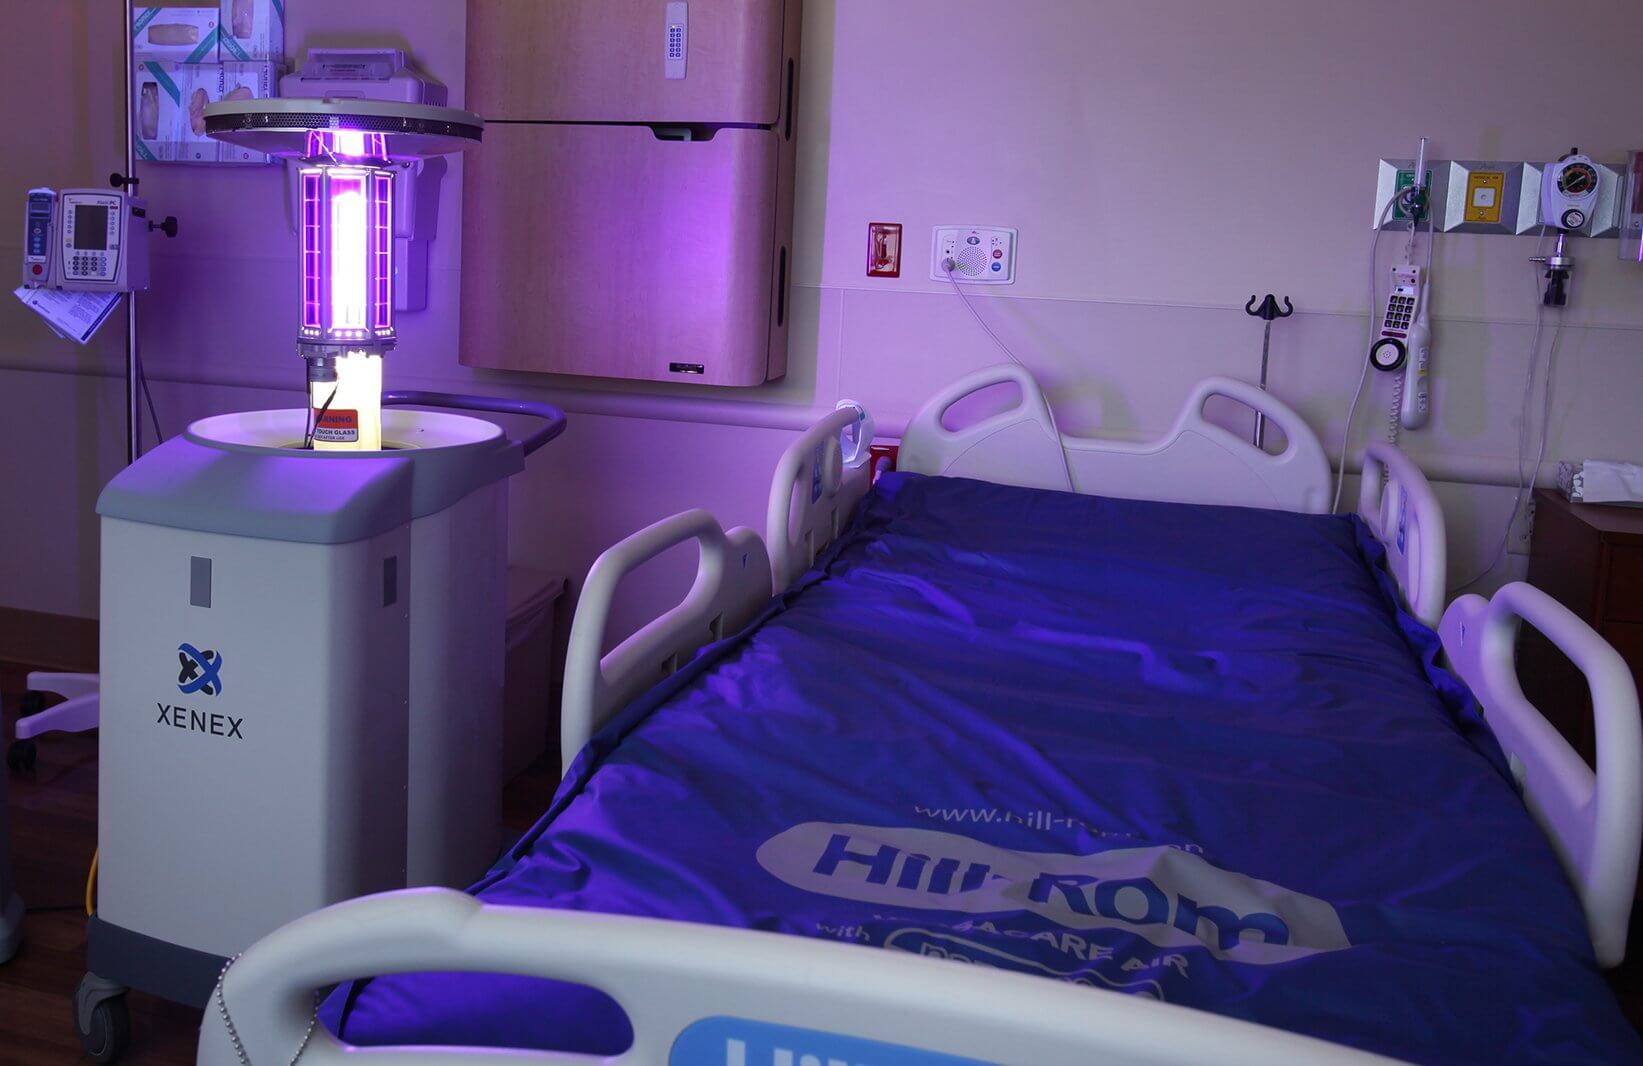 The xenon ultraviolet light system disinfects surfaces using UV rays emitted at about 90 pulses per minute. (Credit: Xenex)